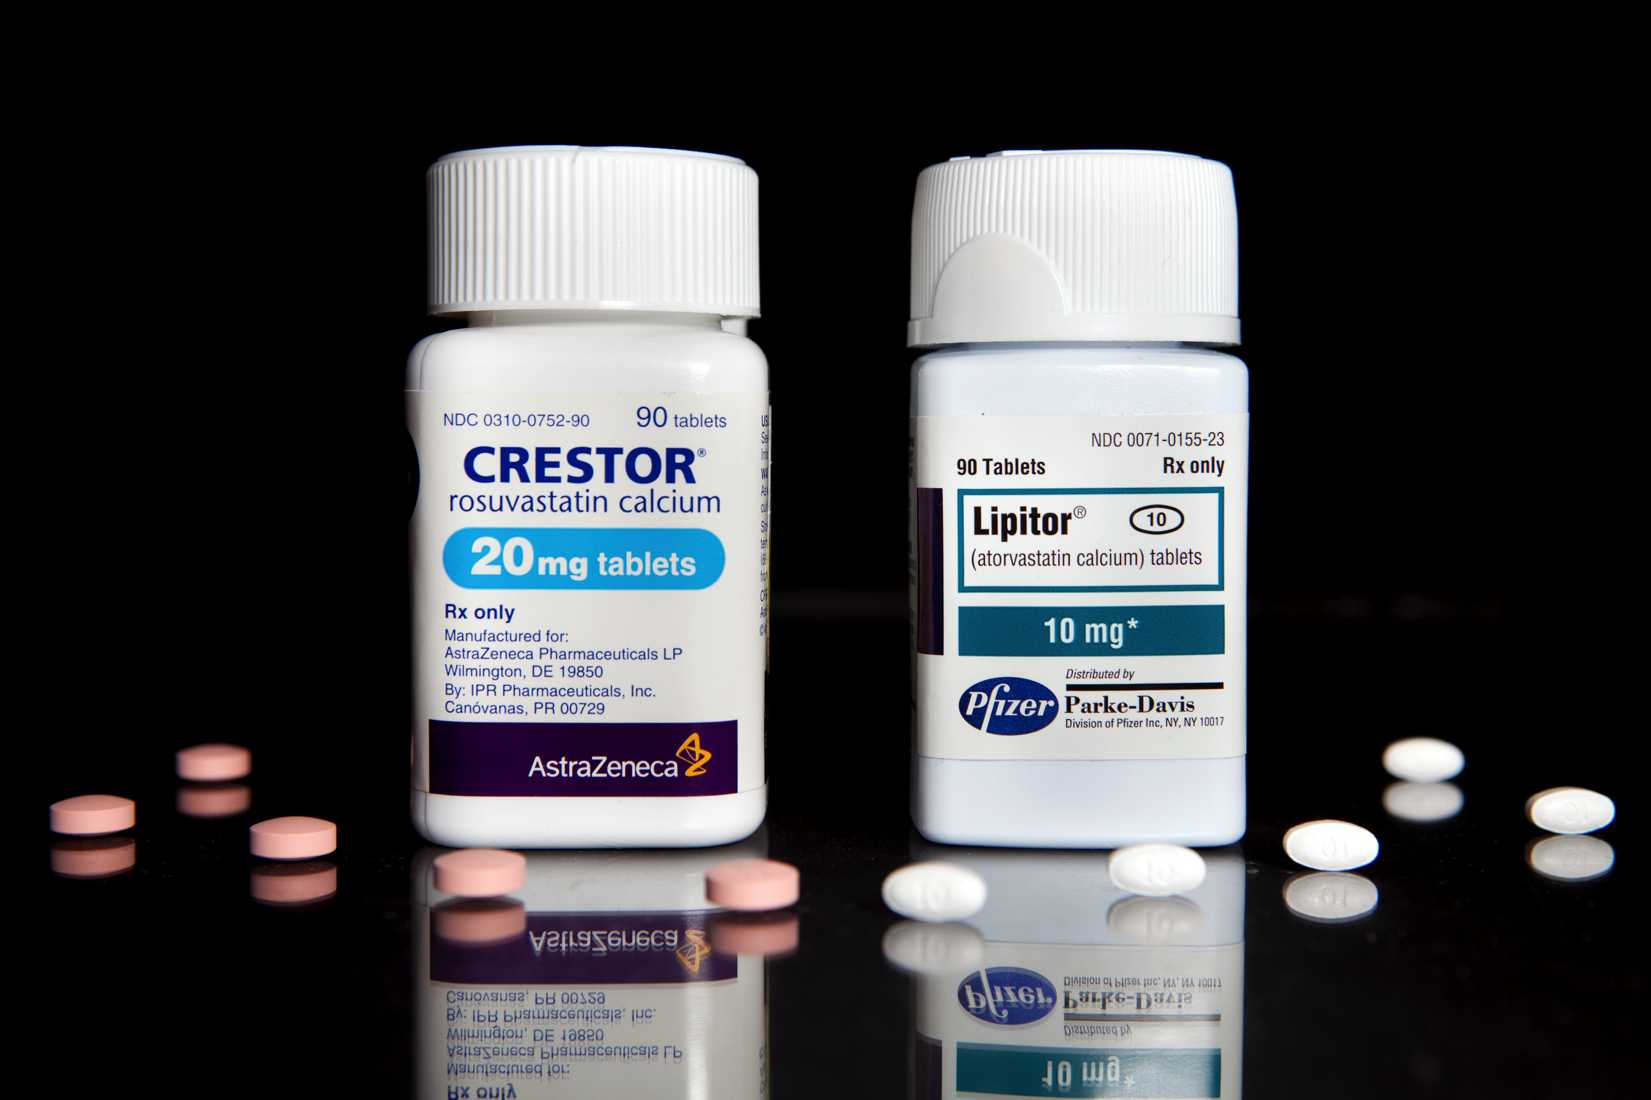 Cholesterol drugs, Crestor, left, manufactured by AstraZeneca Plc, and Lipitor, manufactured by Pfizer Inc., are arranged for a photrograph at New London Pharmacy in New York, U.S., on Tuesday, April 6, 2010. (JB Reed—Bloomberg / Getty Images)